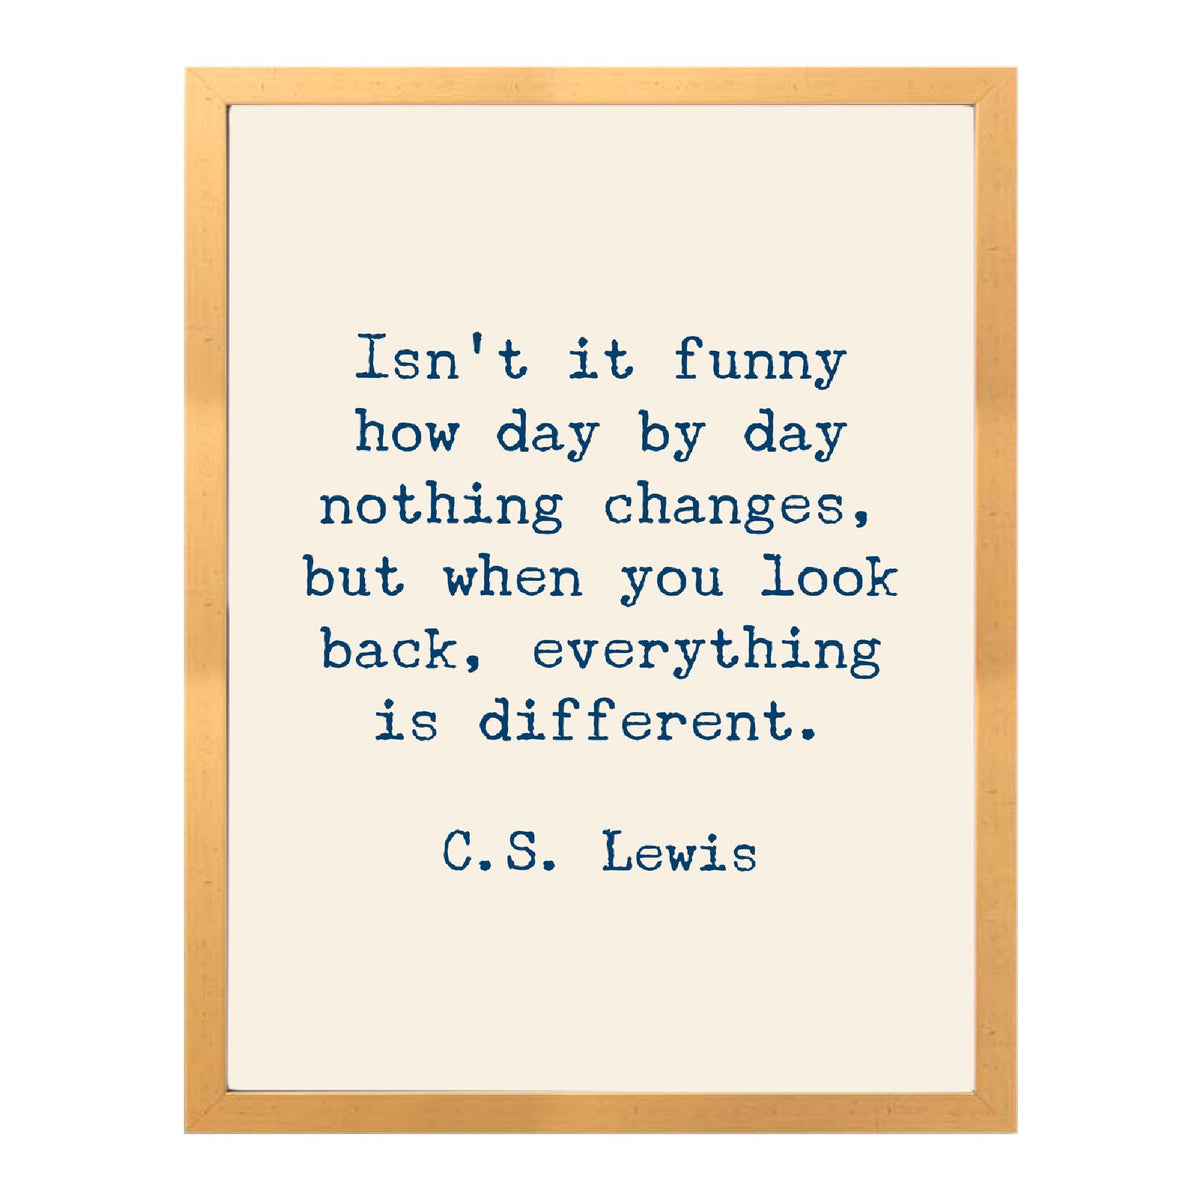 C.S. Lewis Gold Framed Quote